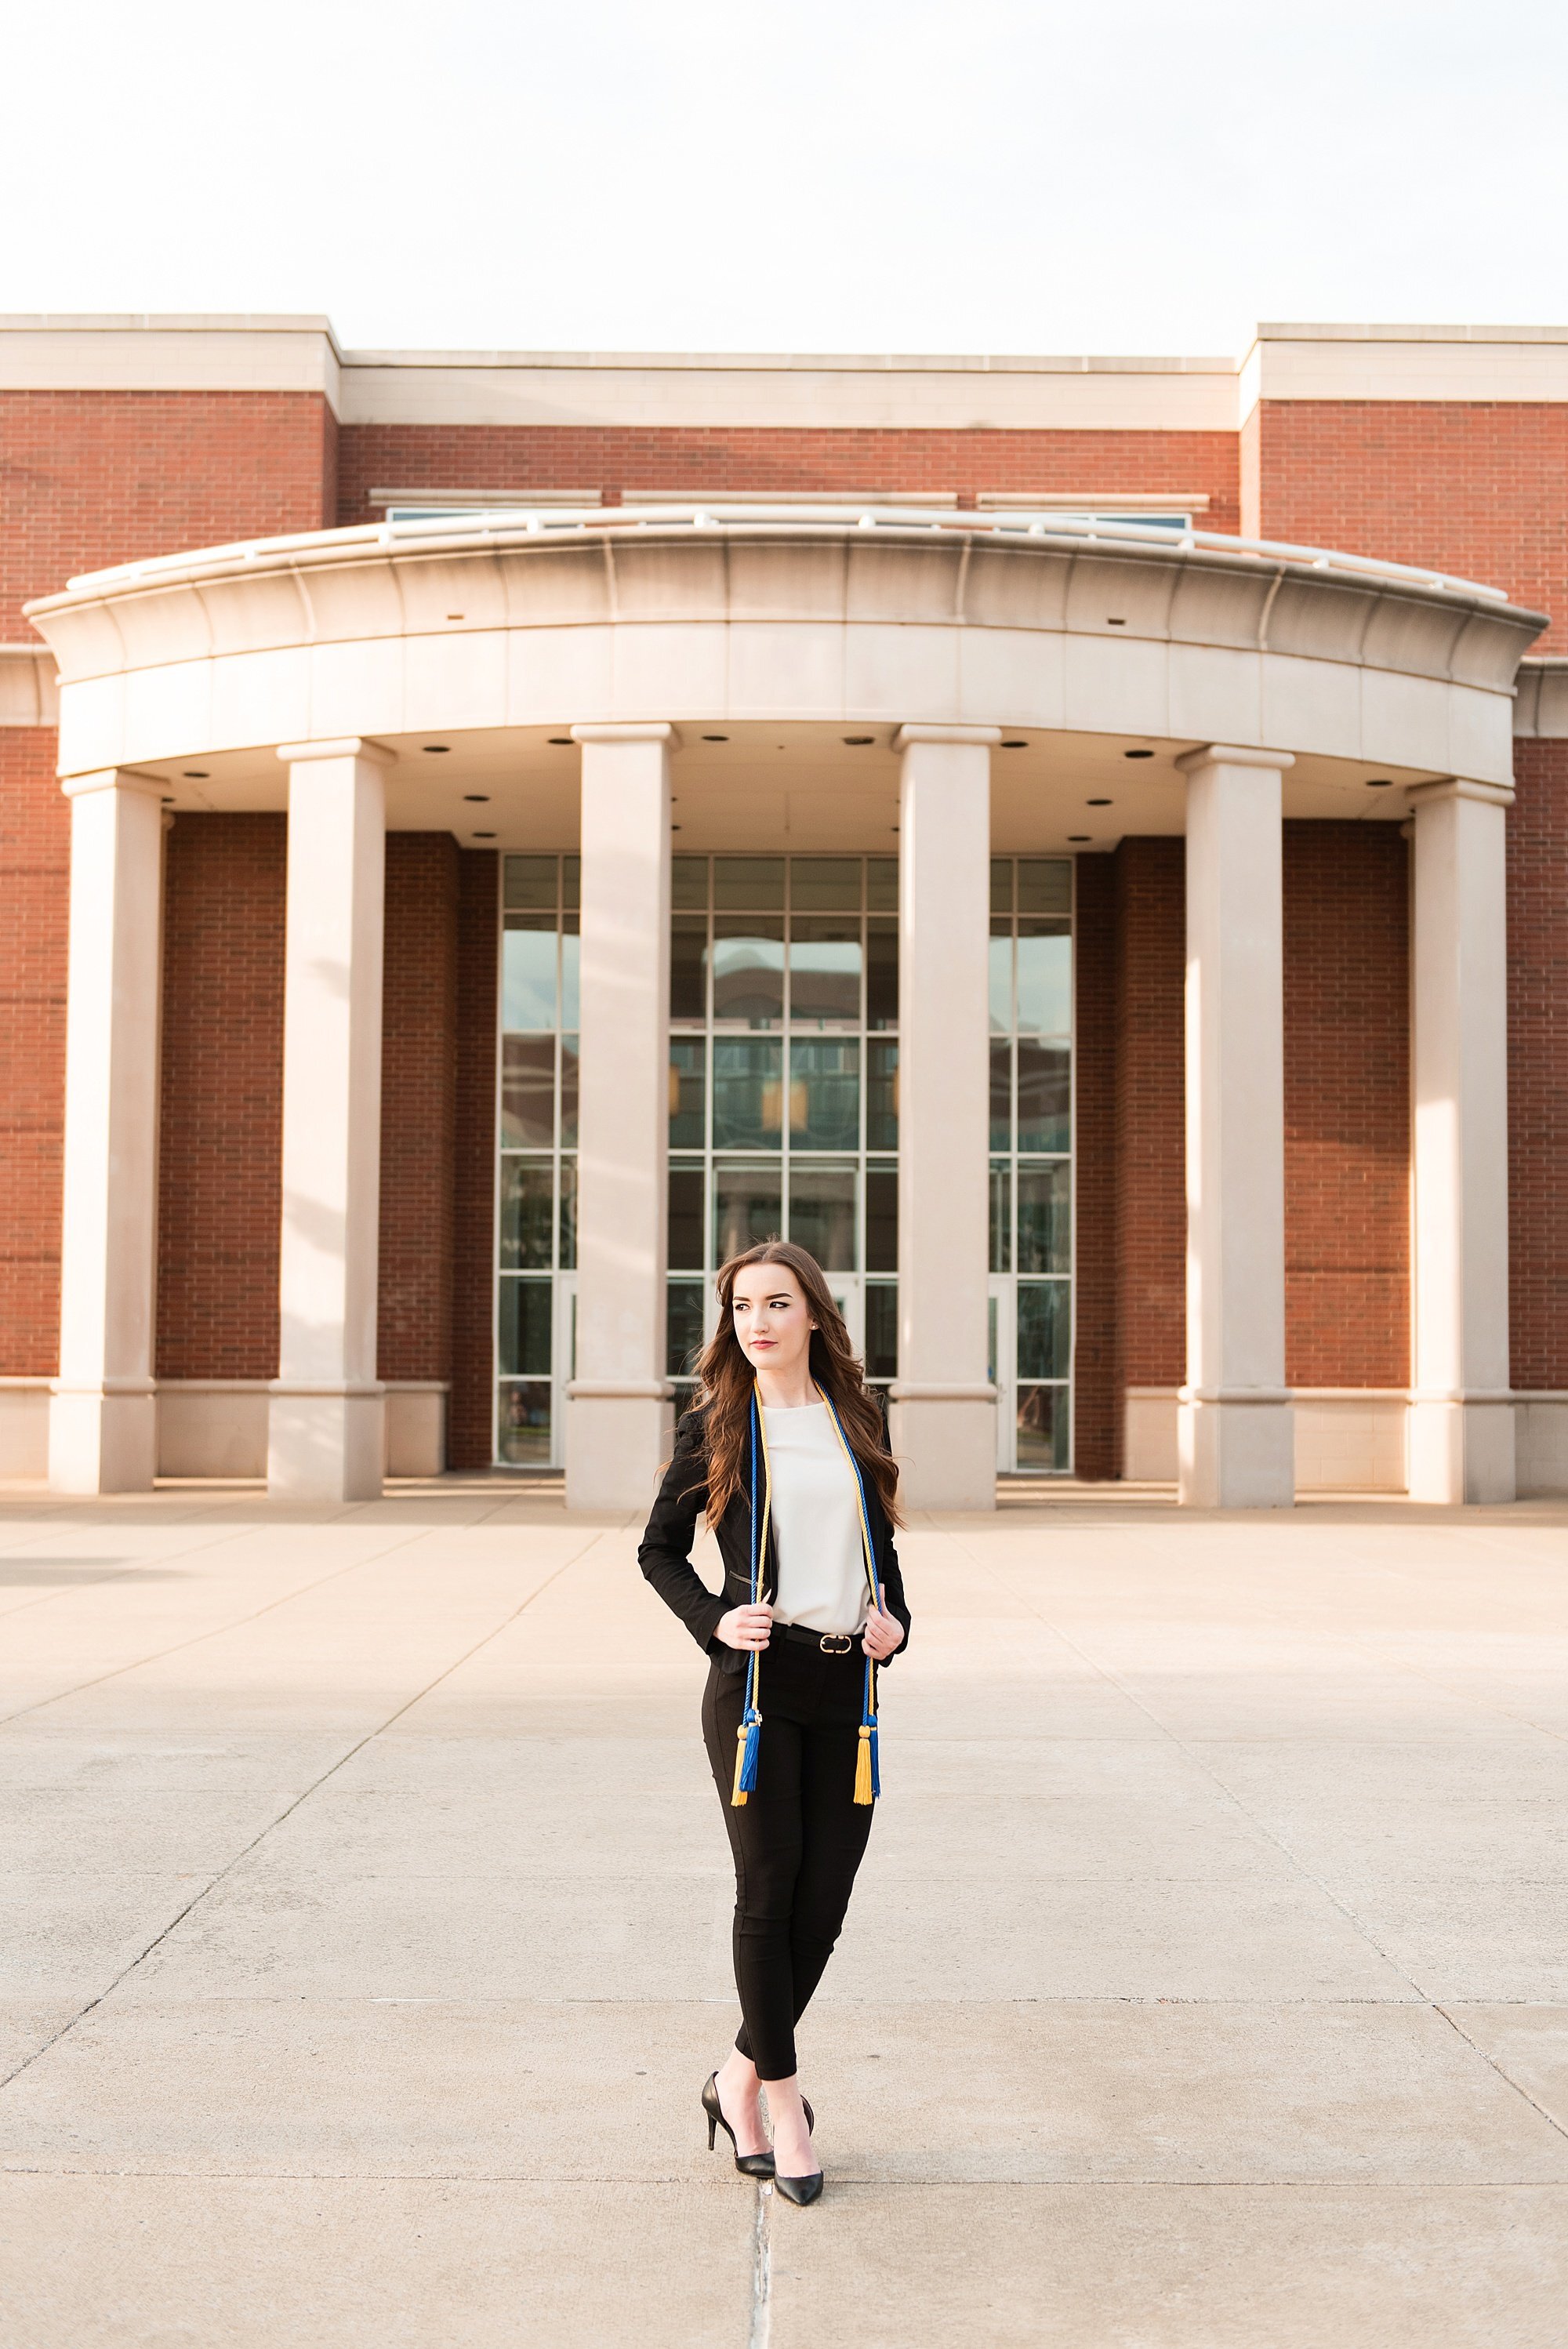 Senior standing in front of her college classes building on the MTSU campus wearing a fitted black suit and her graduation cords